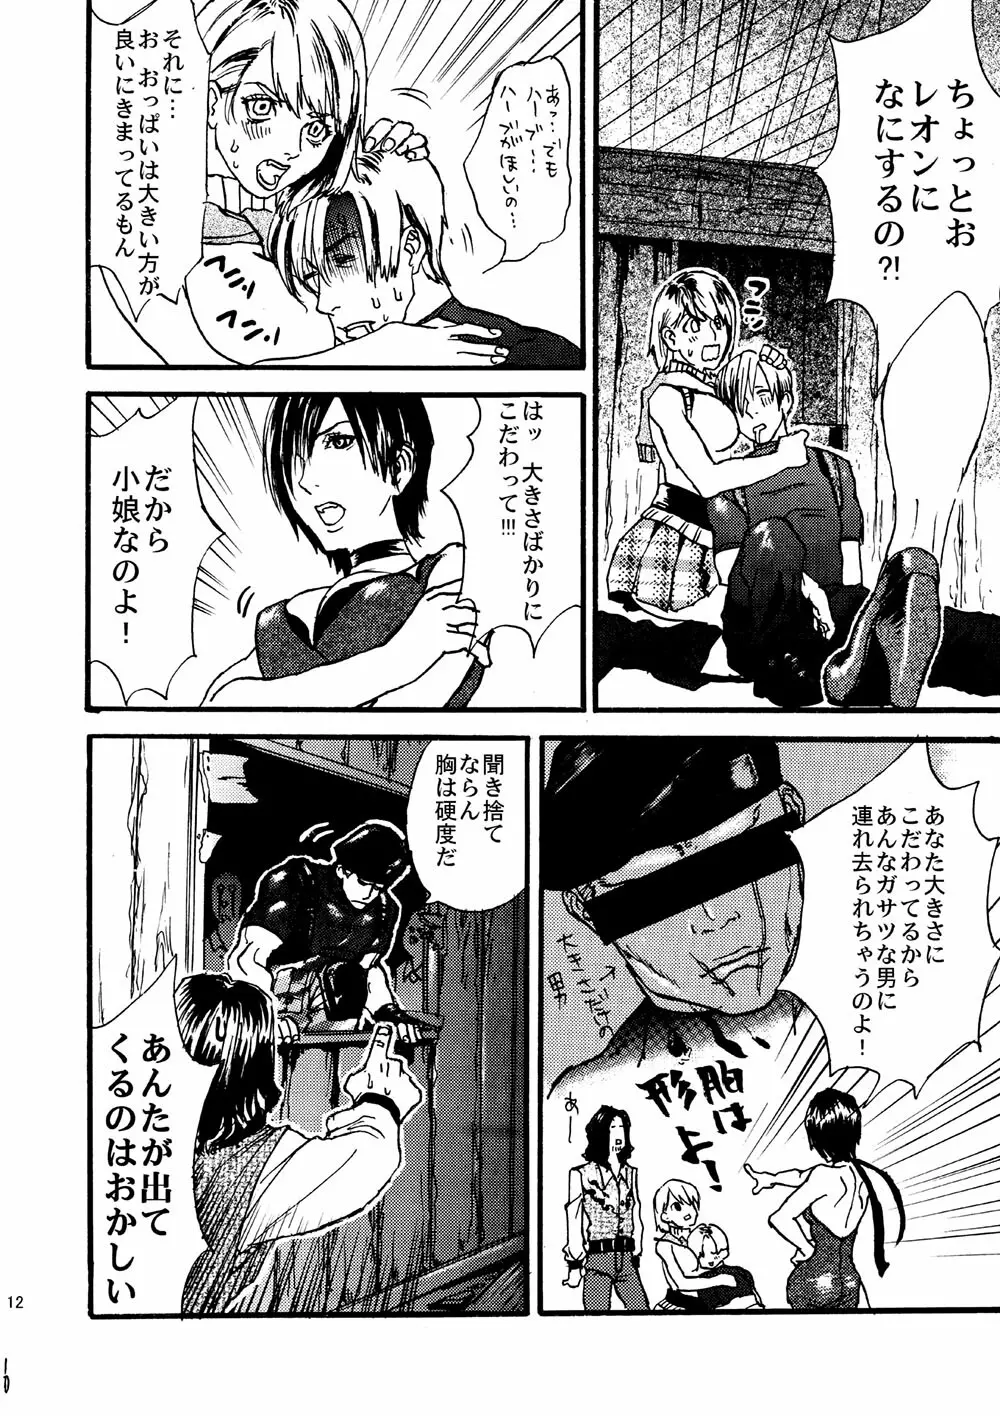 VILLAGE OF FEAR/バイオ４同人誌ｗｅｂ再録 Page.9